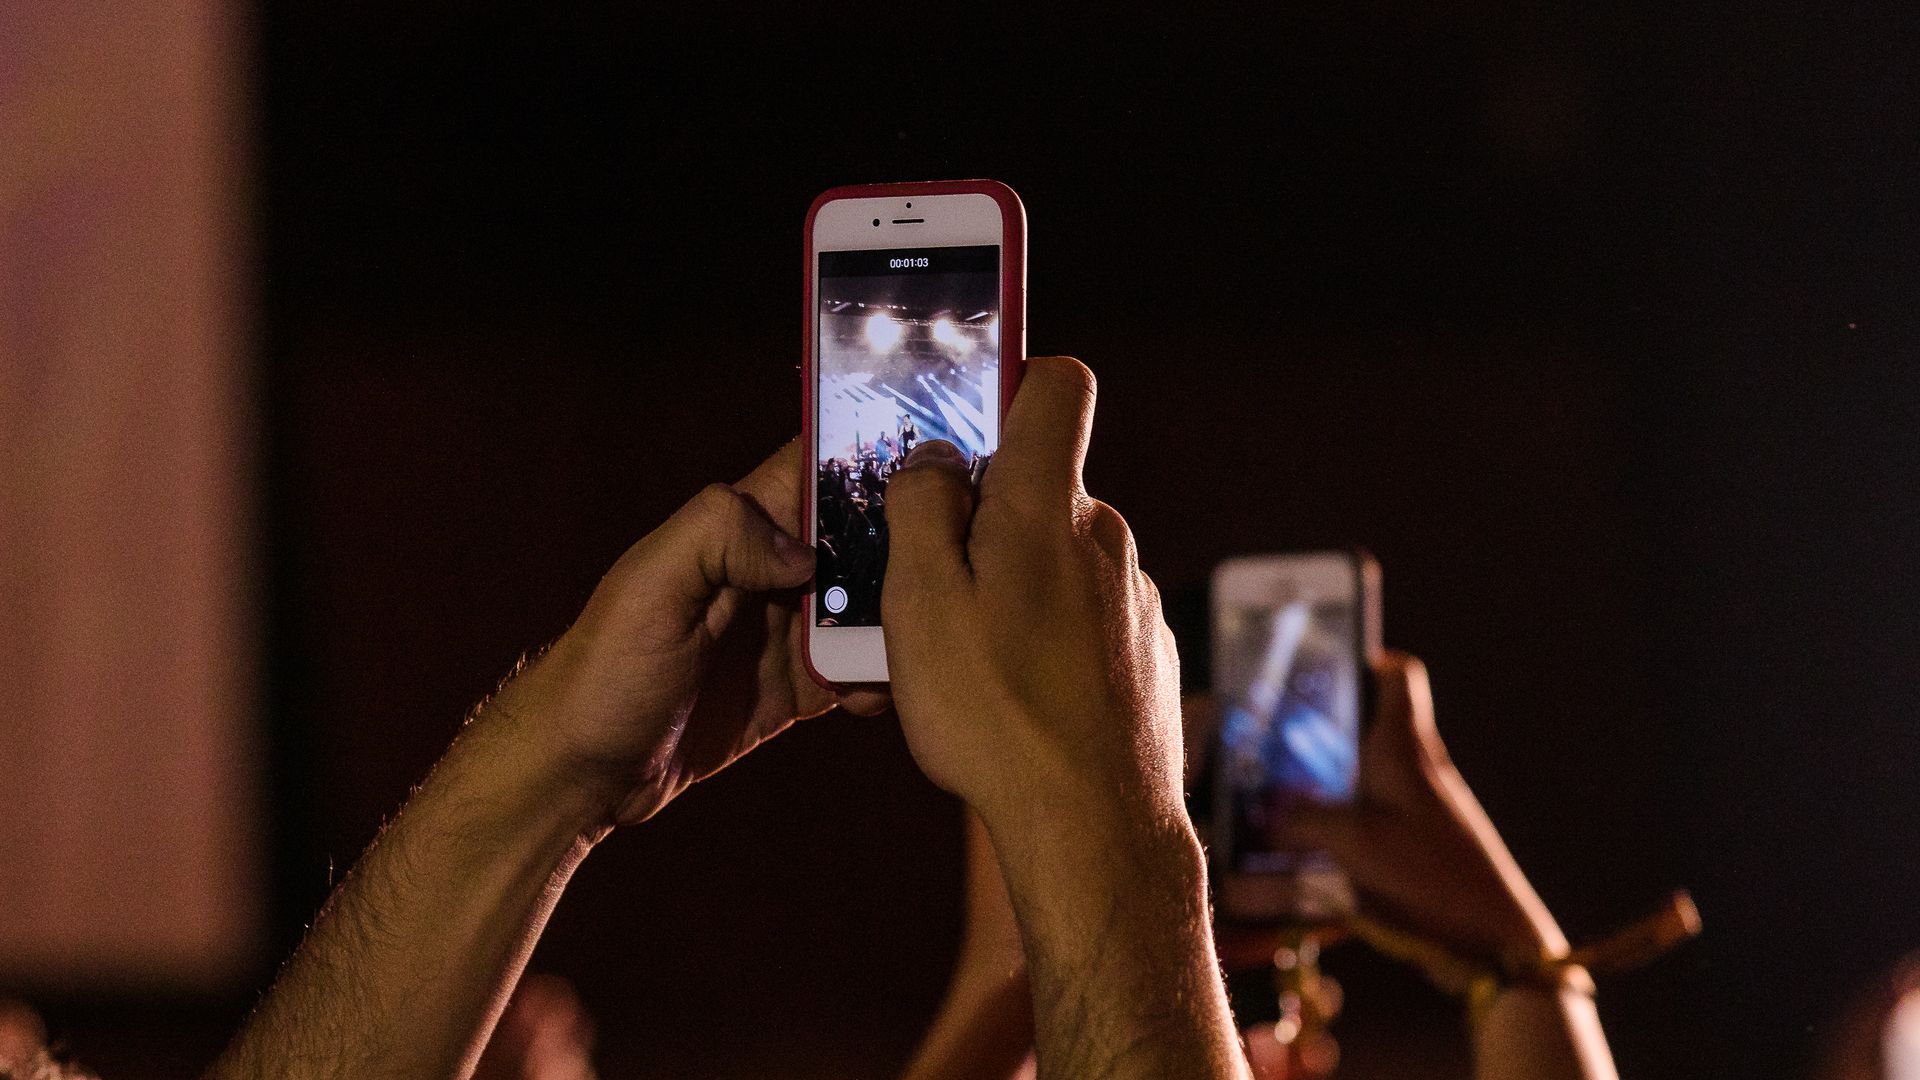 Concert-goers record a show on their phones